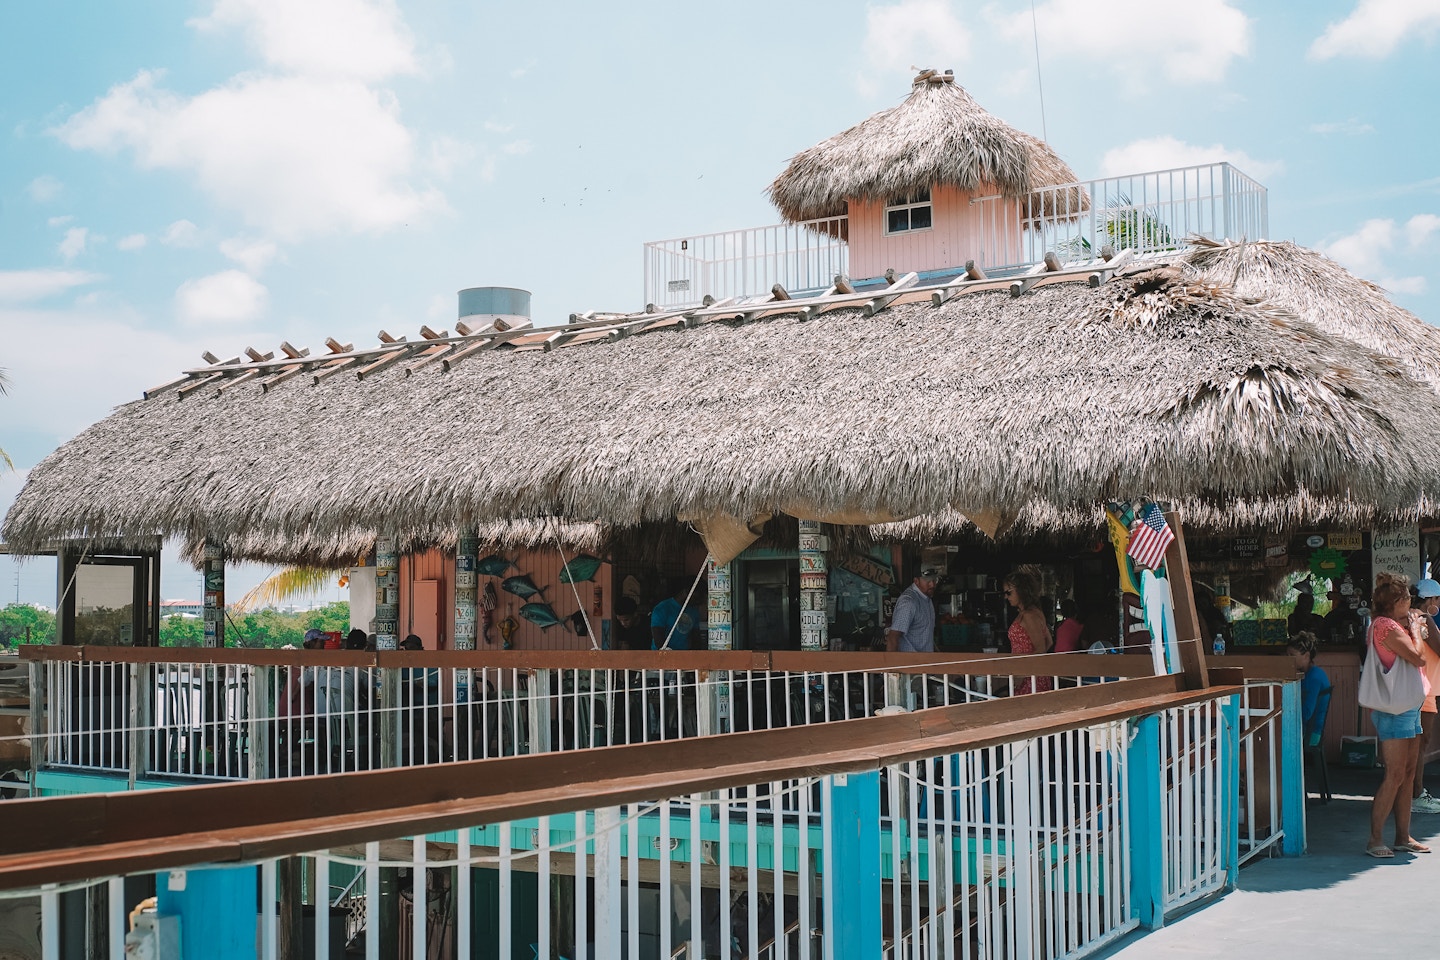 Burdines Waterfront Restaurant in Marathon Florida is a local tiki bar with excellent sandwiches, seafood and craft beers.